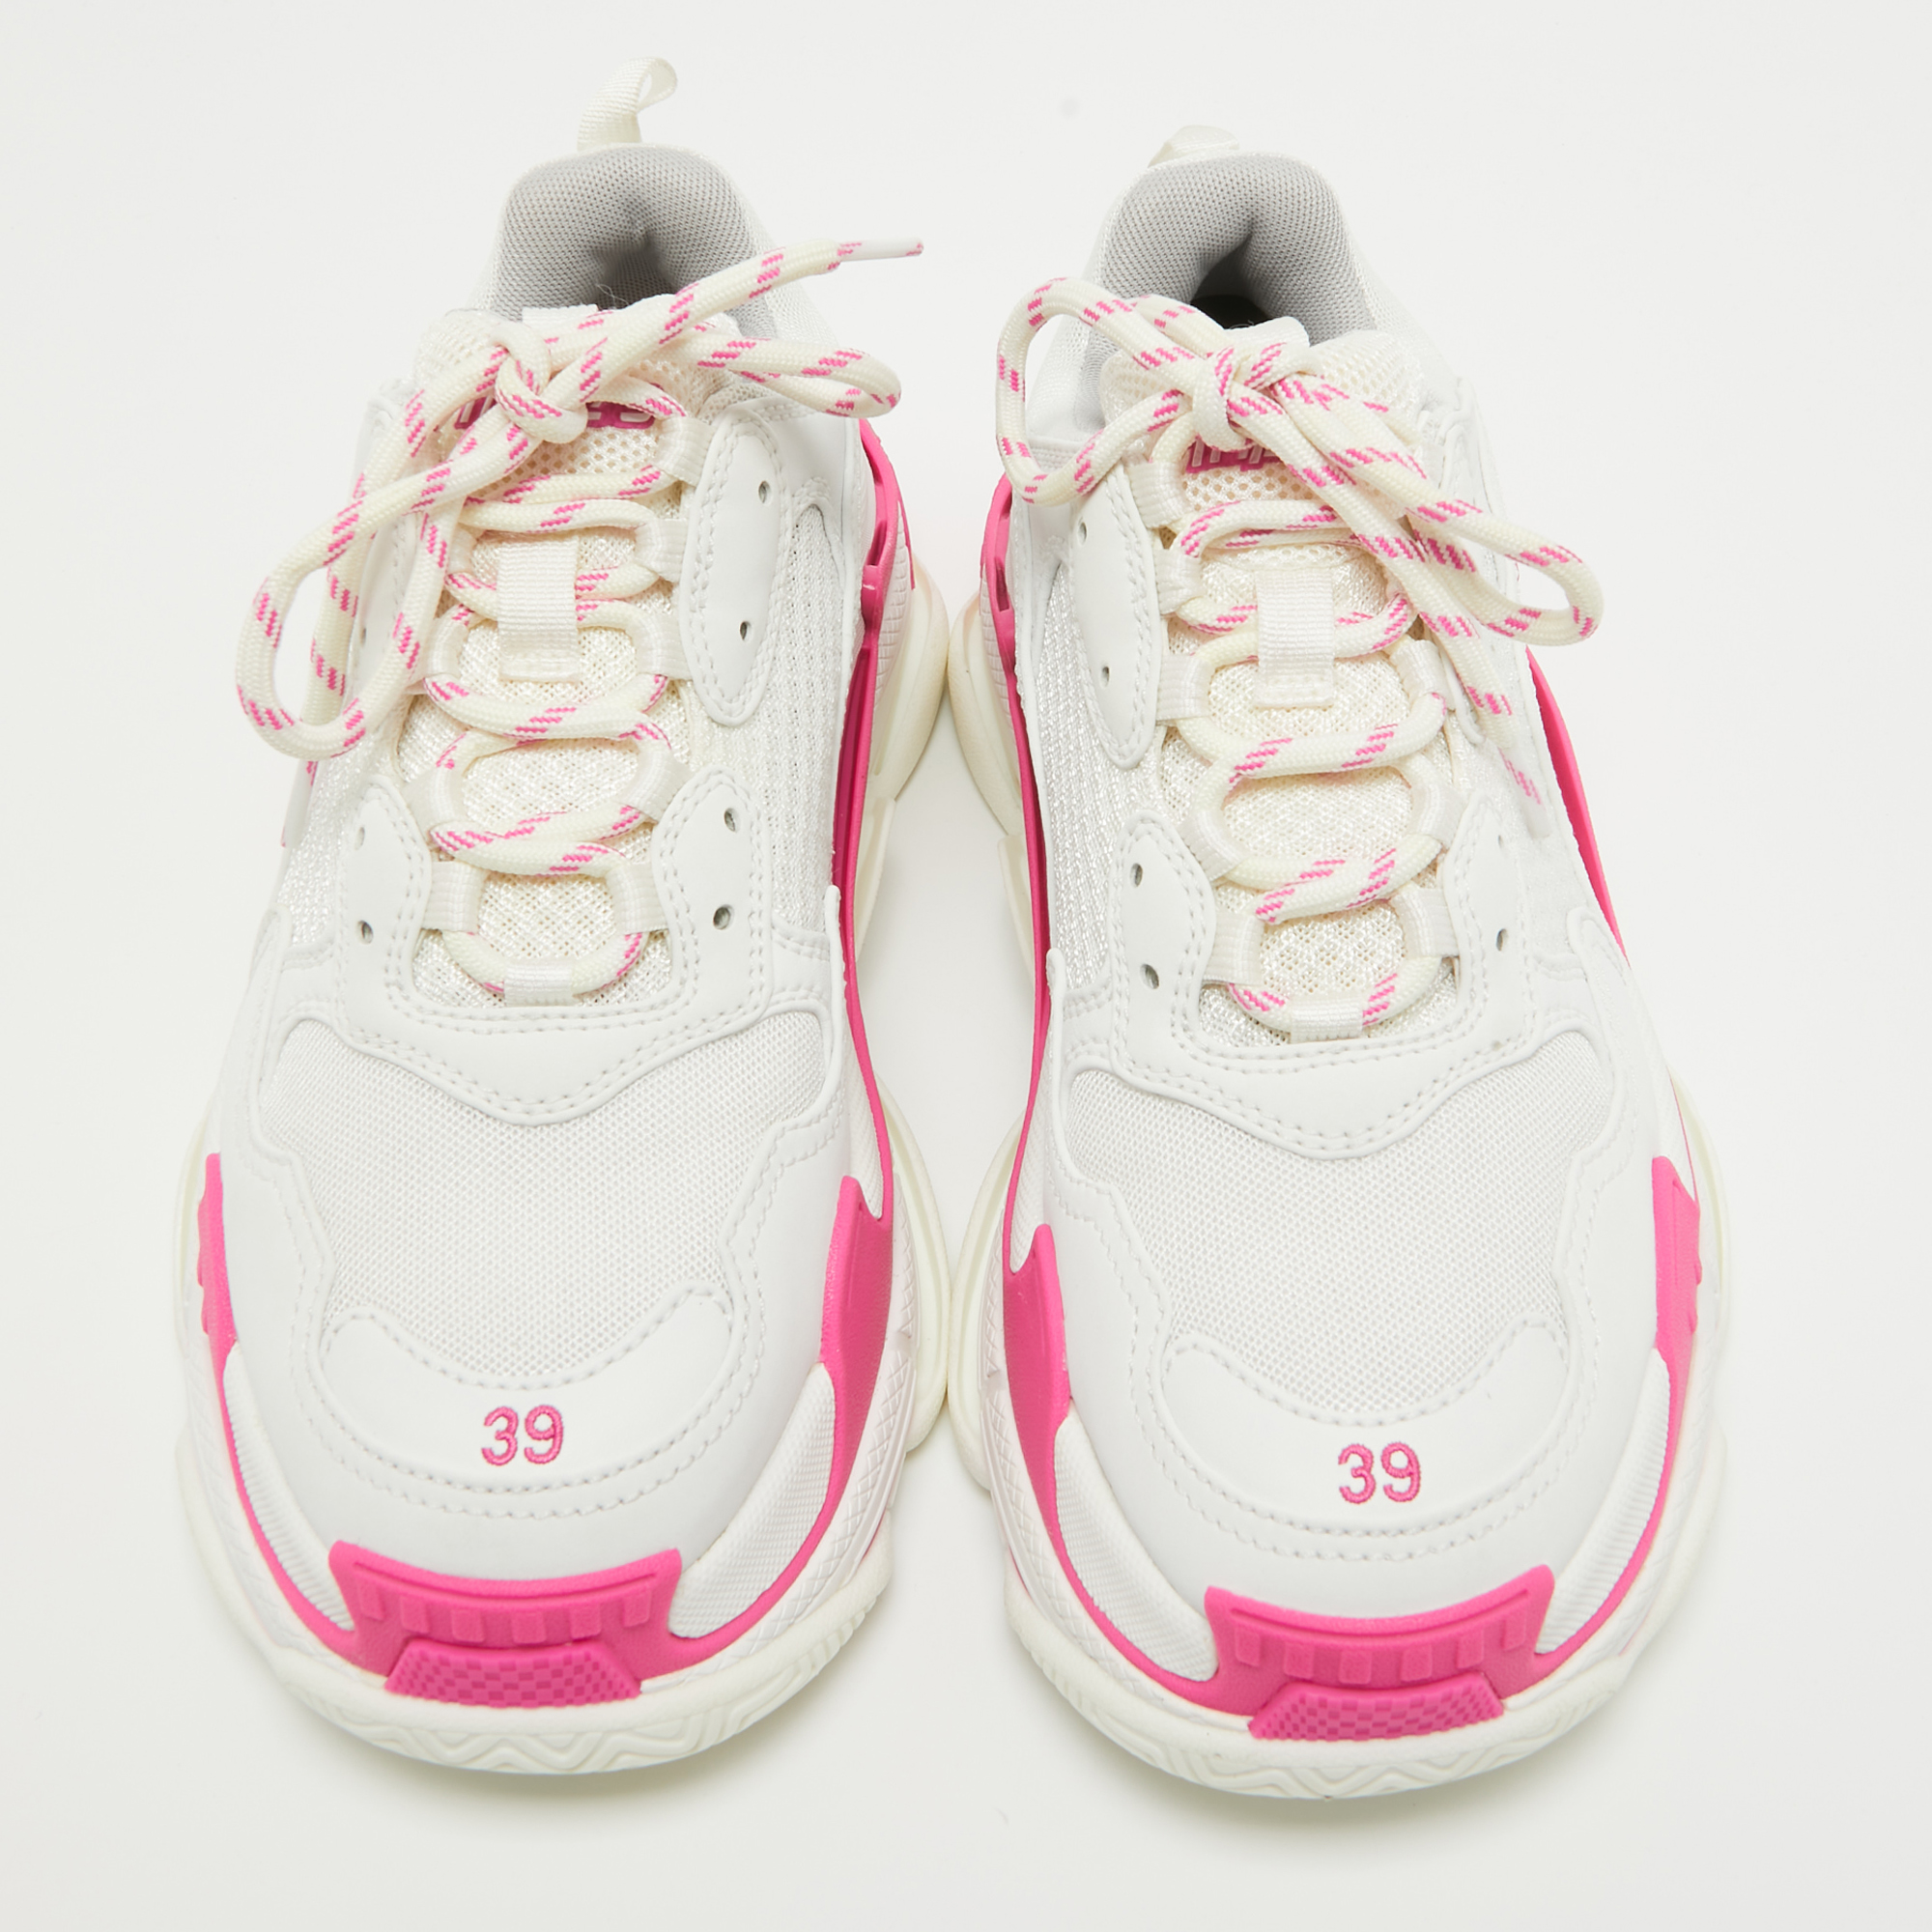 Balenciaga White/Pink Leather And Mesh Triple S Sneakers Size 39